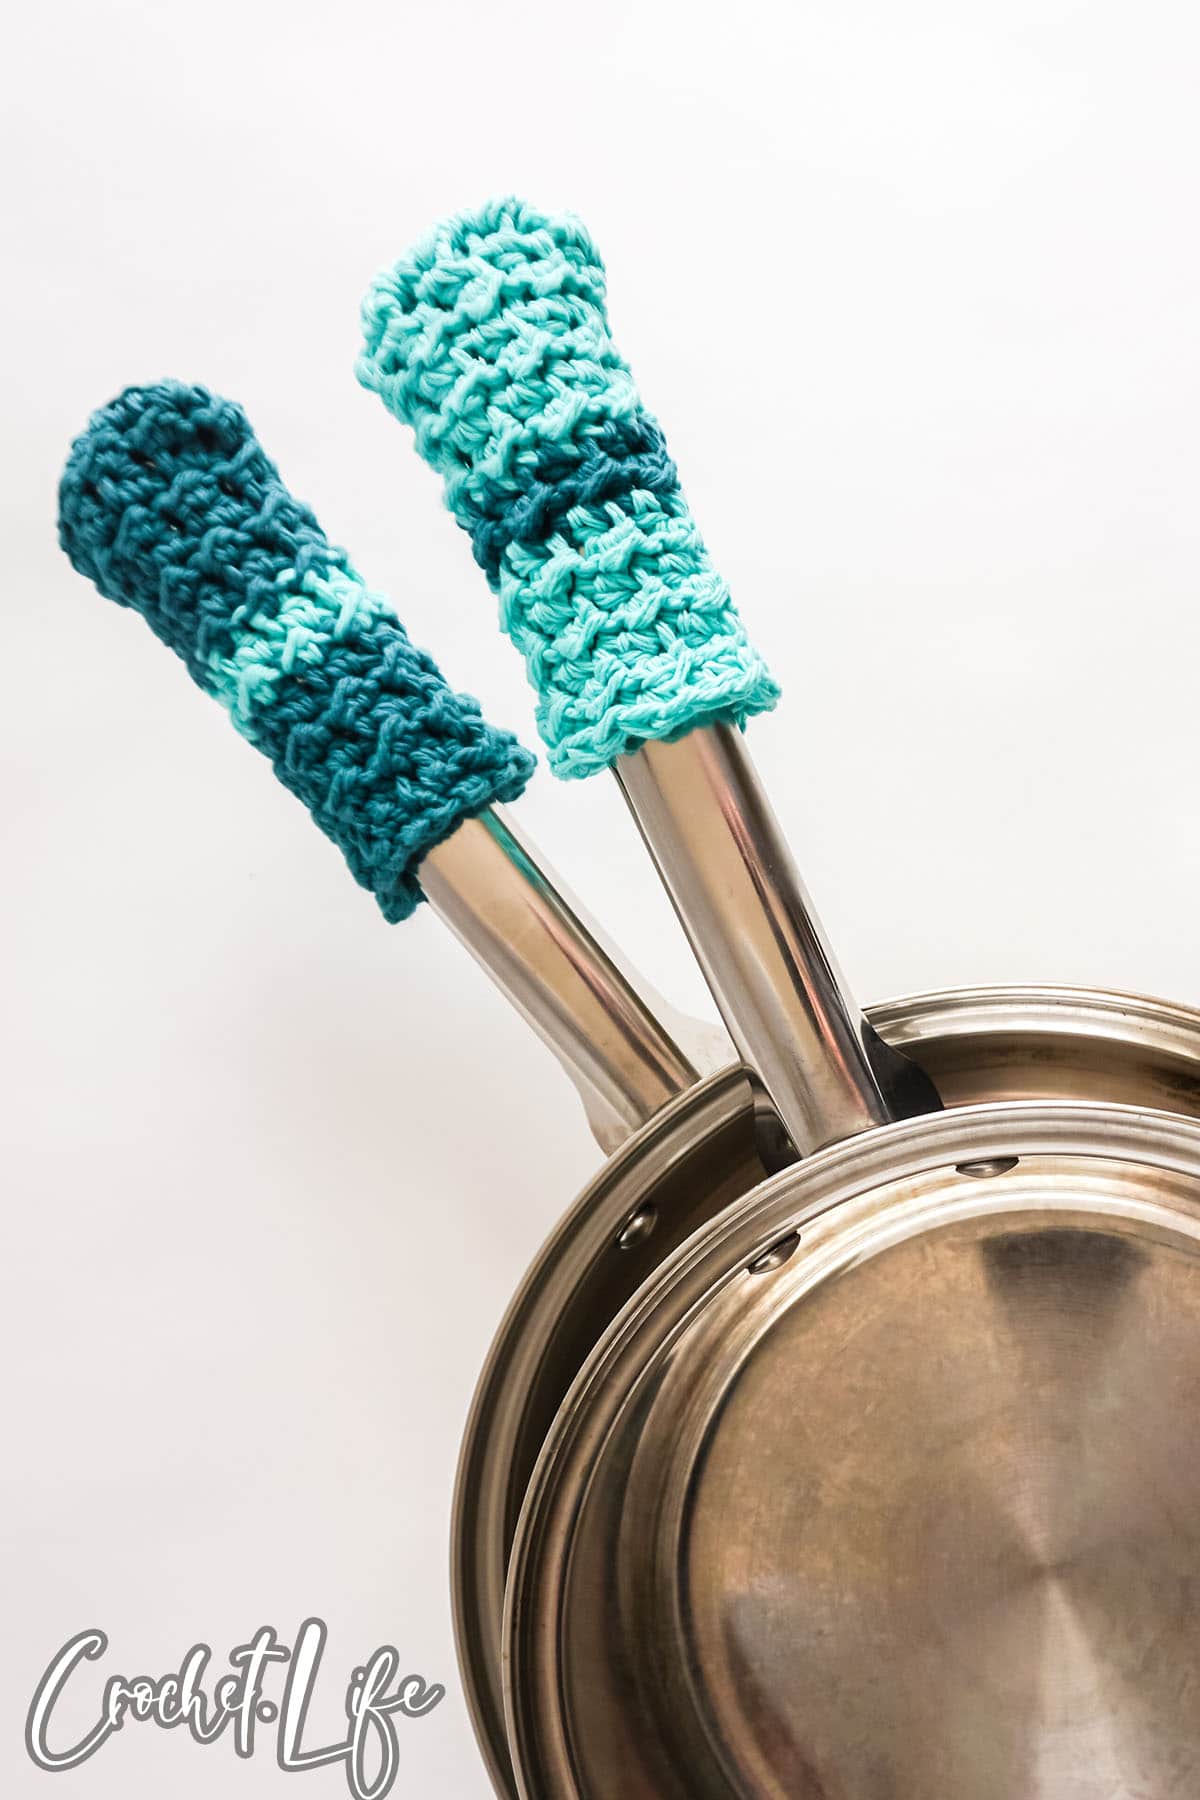 easy crochet pattern for a pot handle cover